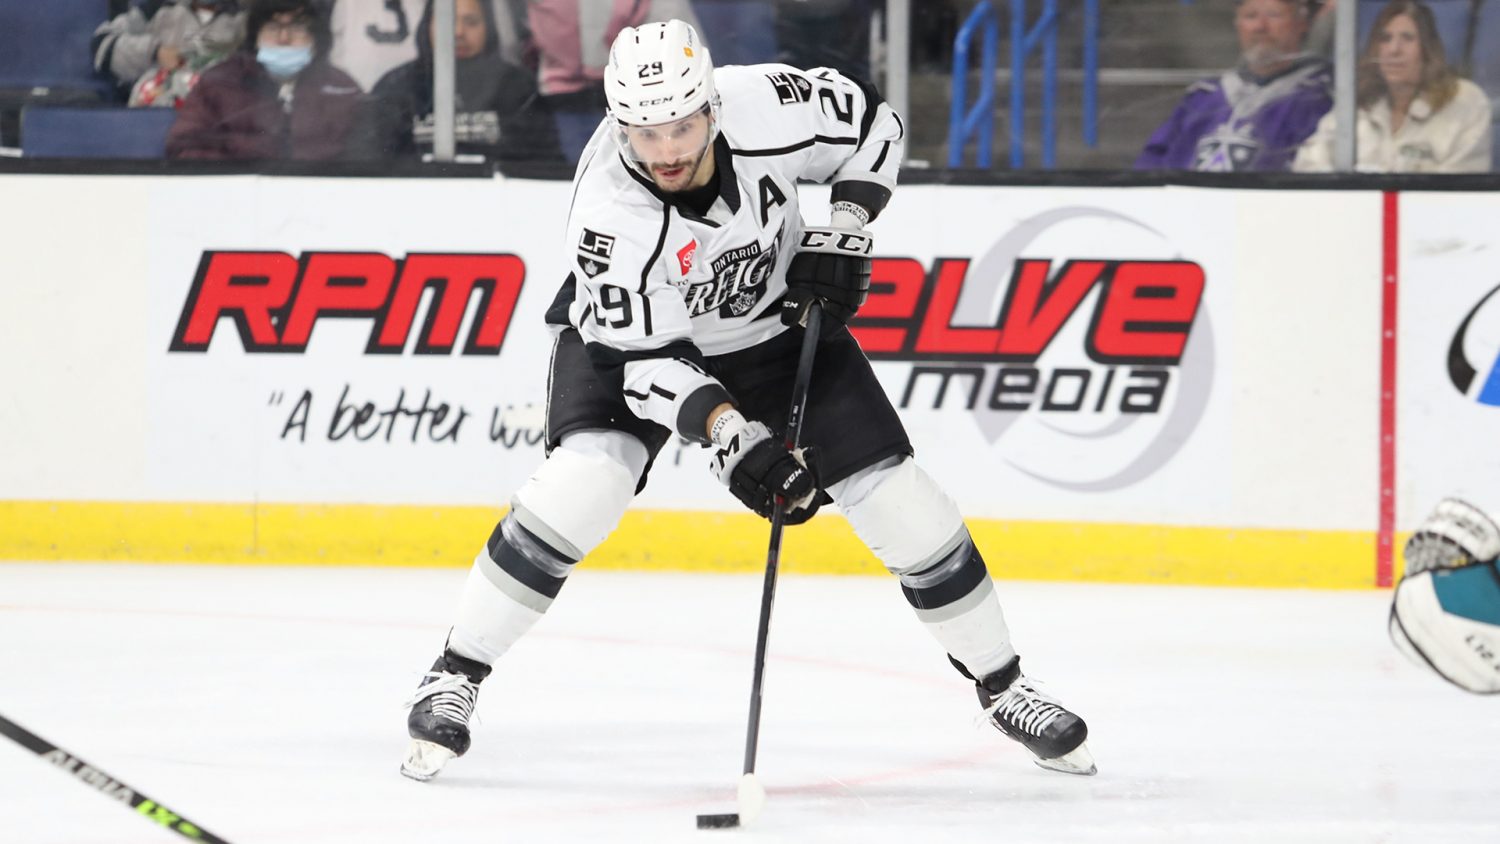 Ontario Reign - What do you think of these 2000s inspired LA Kings